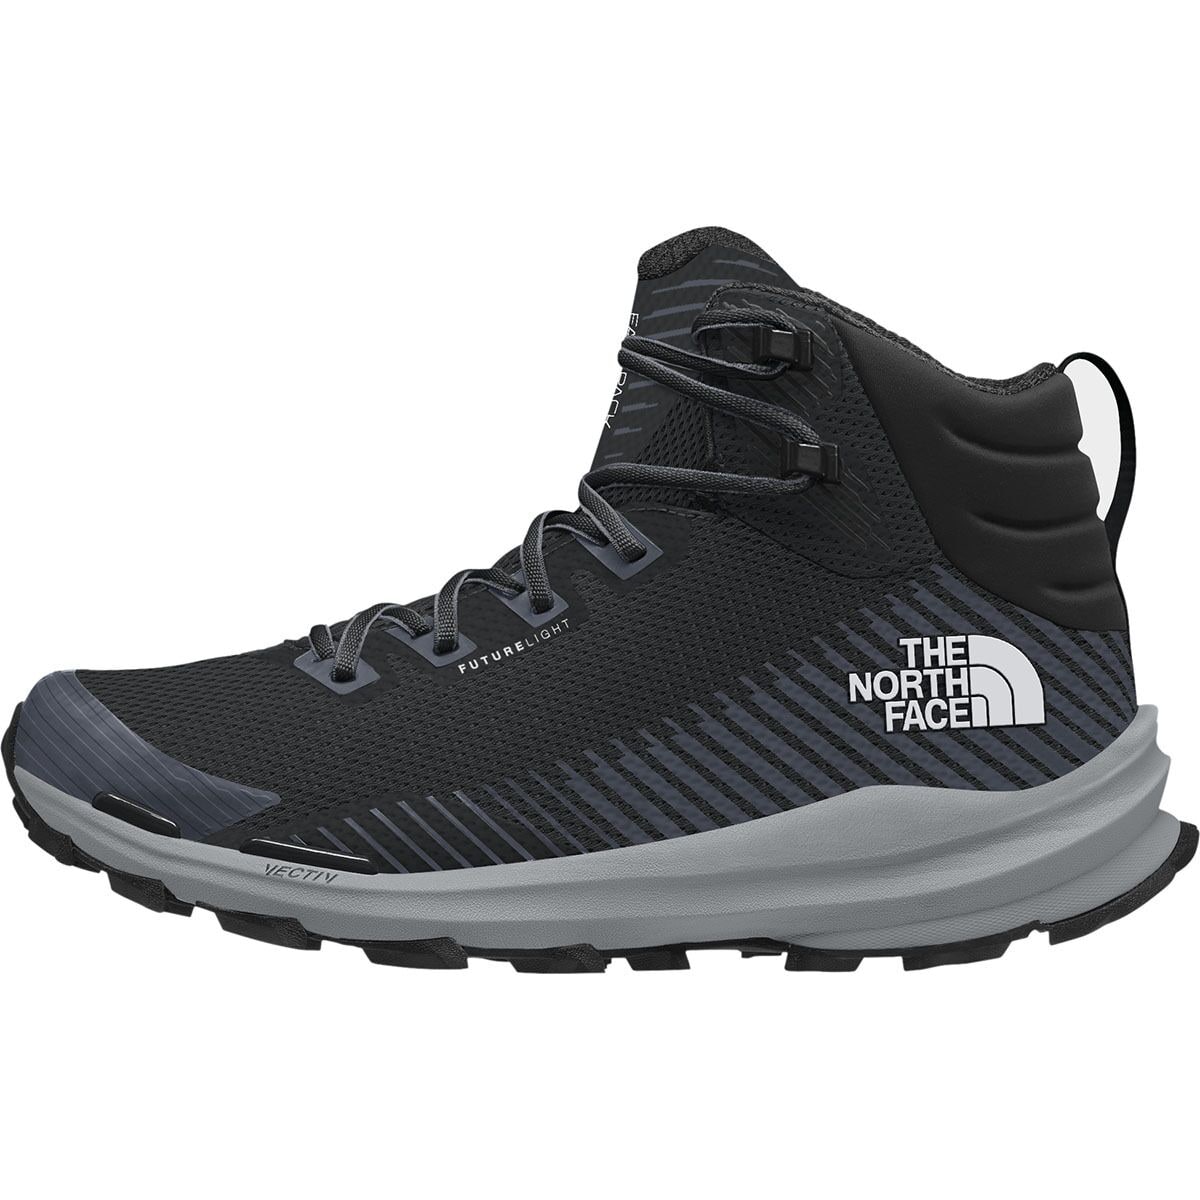 Photos - Trekking Shoes The North Face VECTIV Fastpack Mid FUTURELIGHT Hiking Boot - Men's 